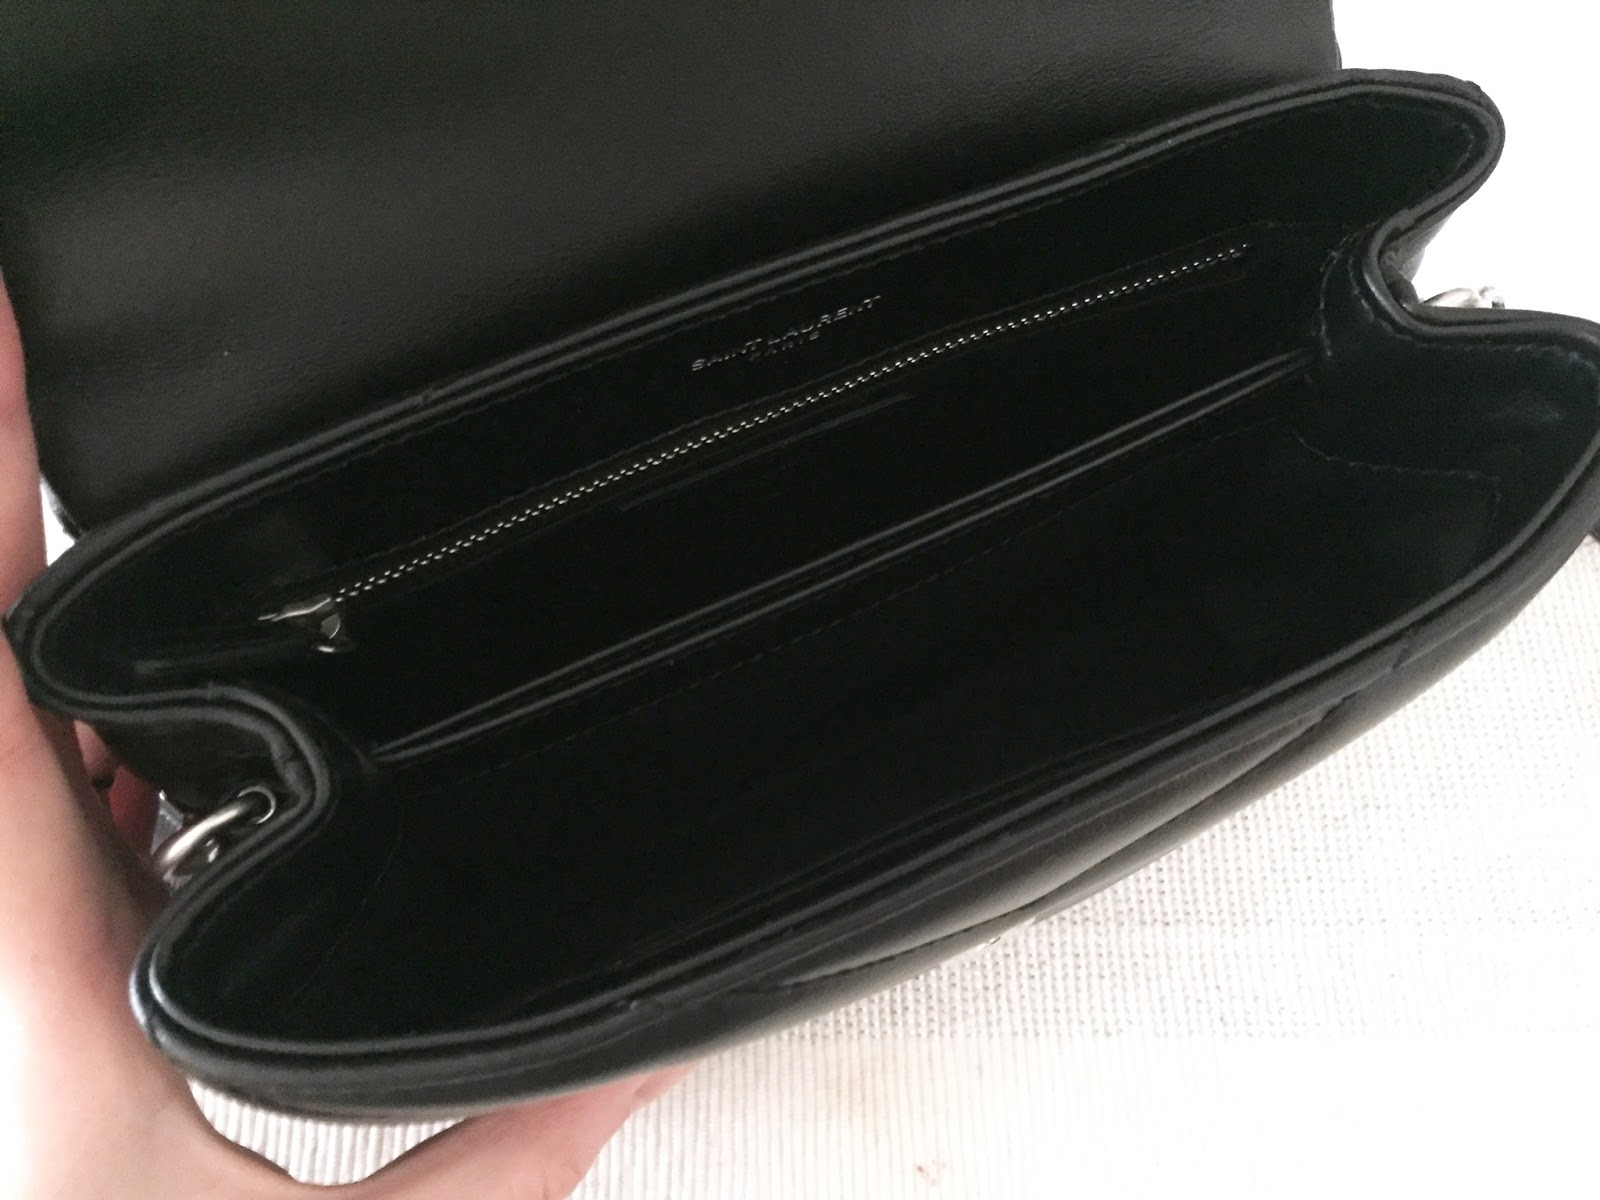 Unboxing: YSL Toy LouLou bag black with gold hardware - non-adjustable  strap? // April 2021 